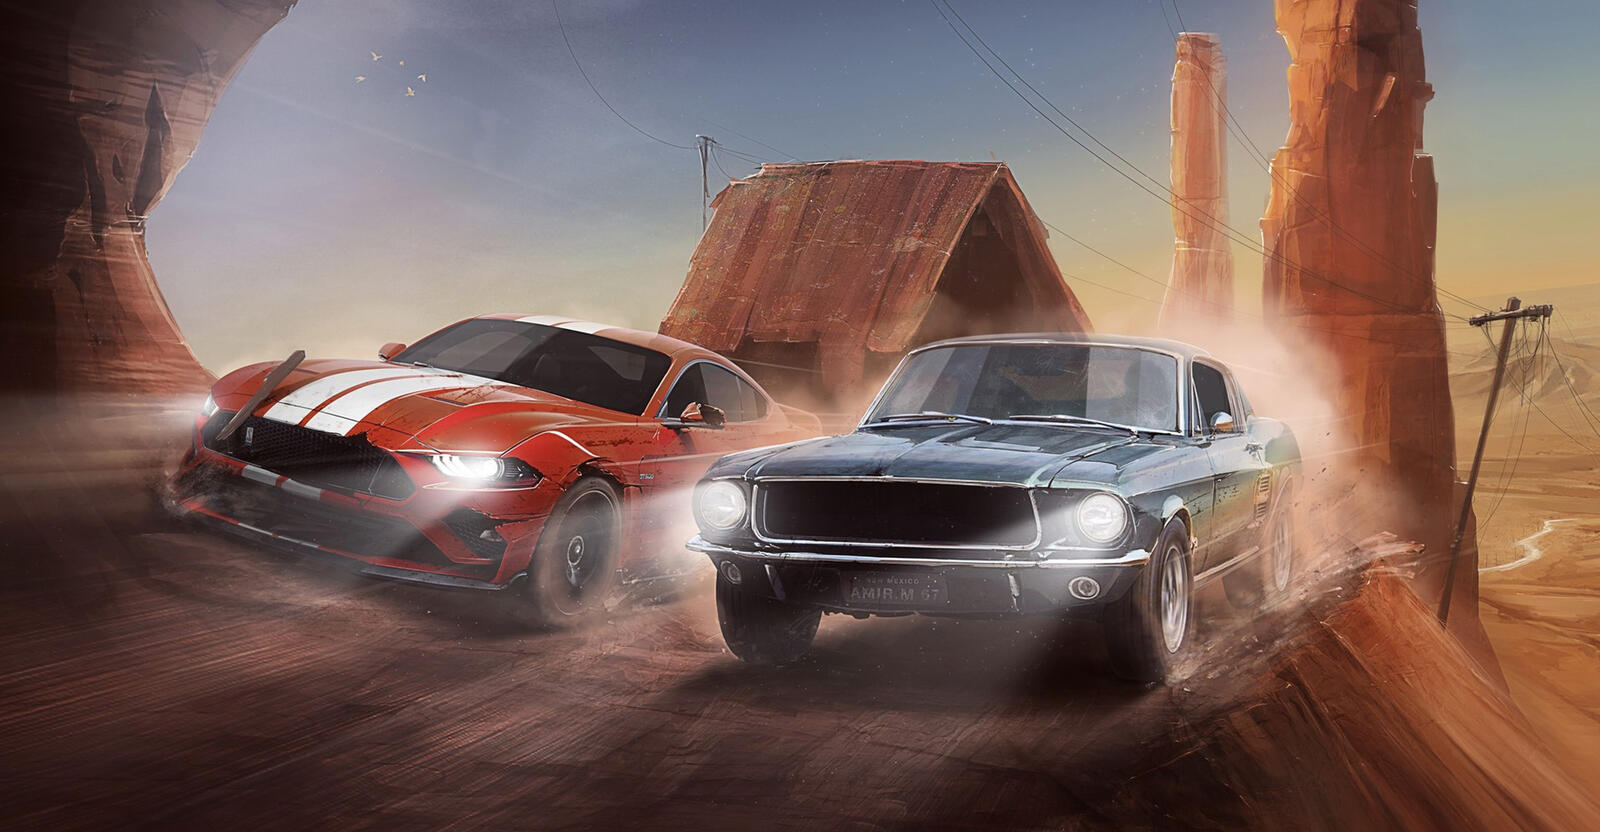 Wallpapers two cars games racing on the desktop